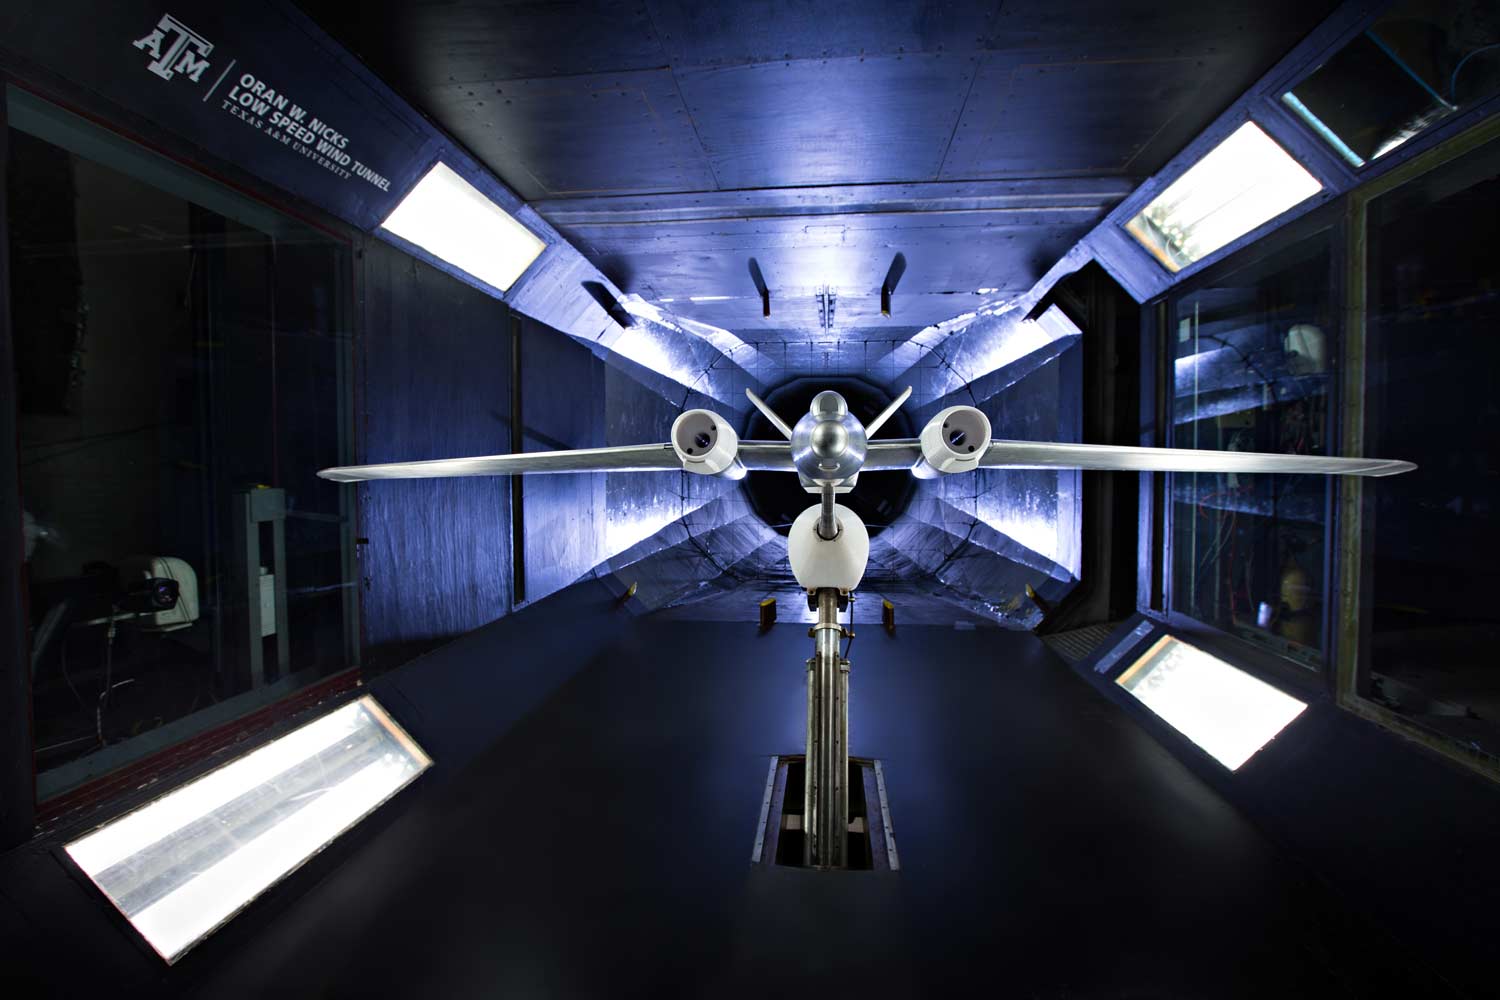 Inside look at the Wind Tunnel research facility on the Texas A&M University campus